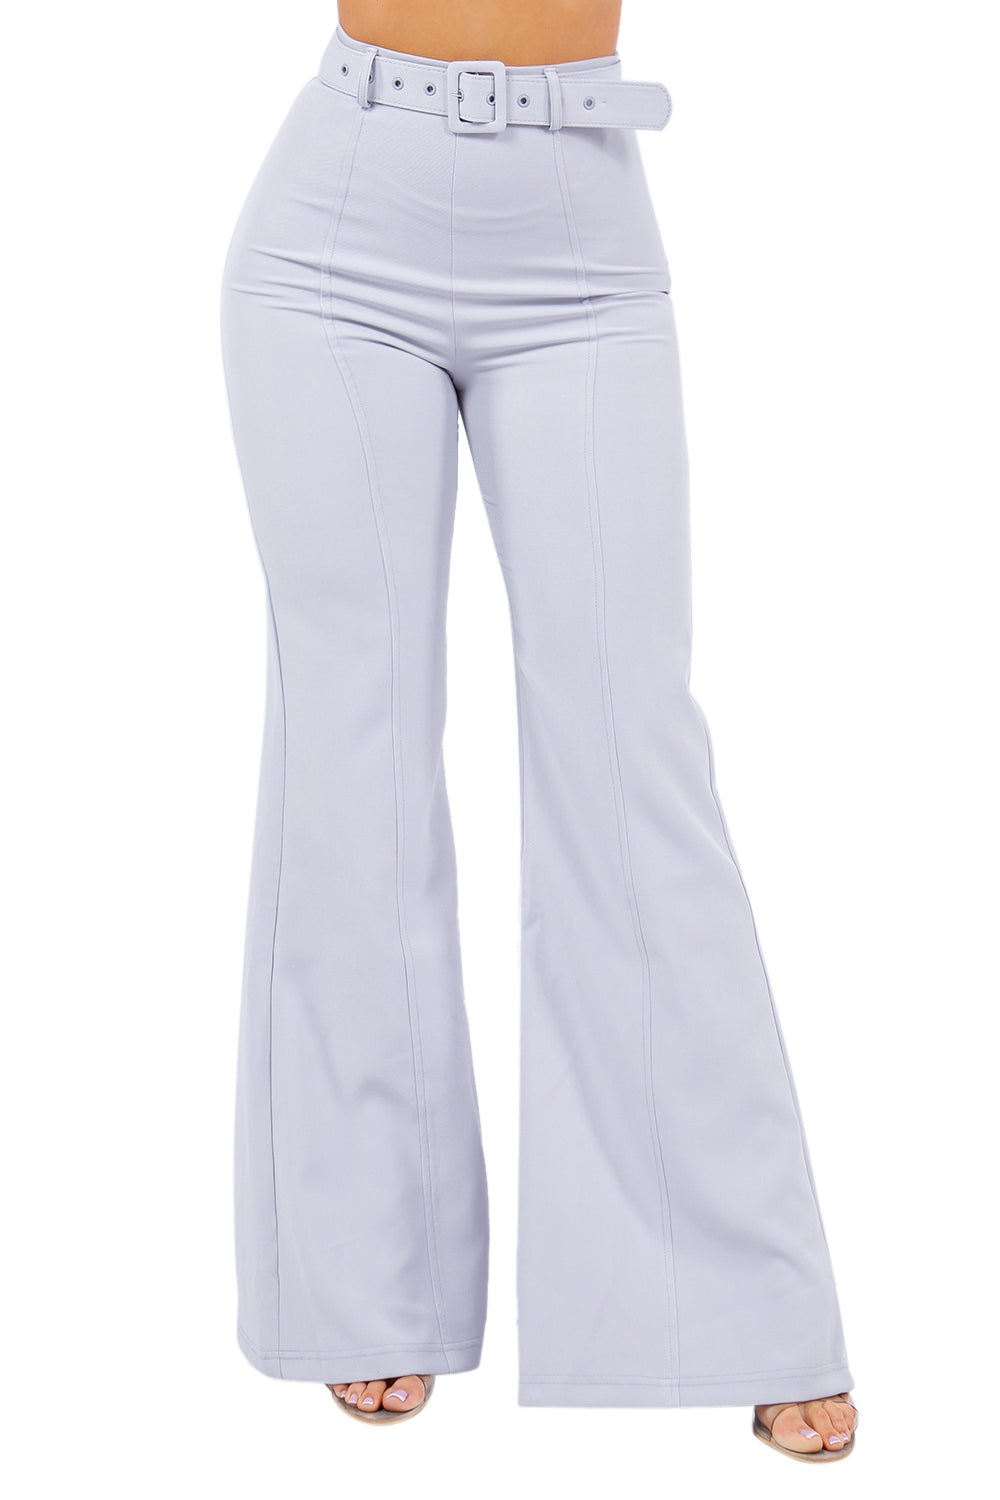 Women's High-Waisted Flared Pants with Belt